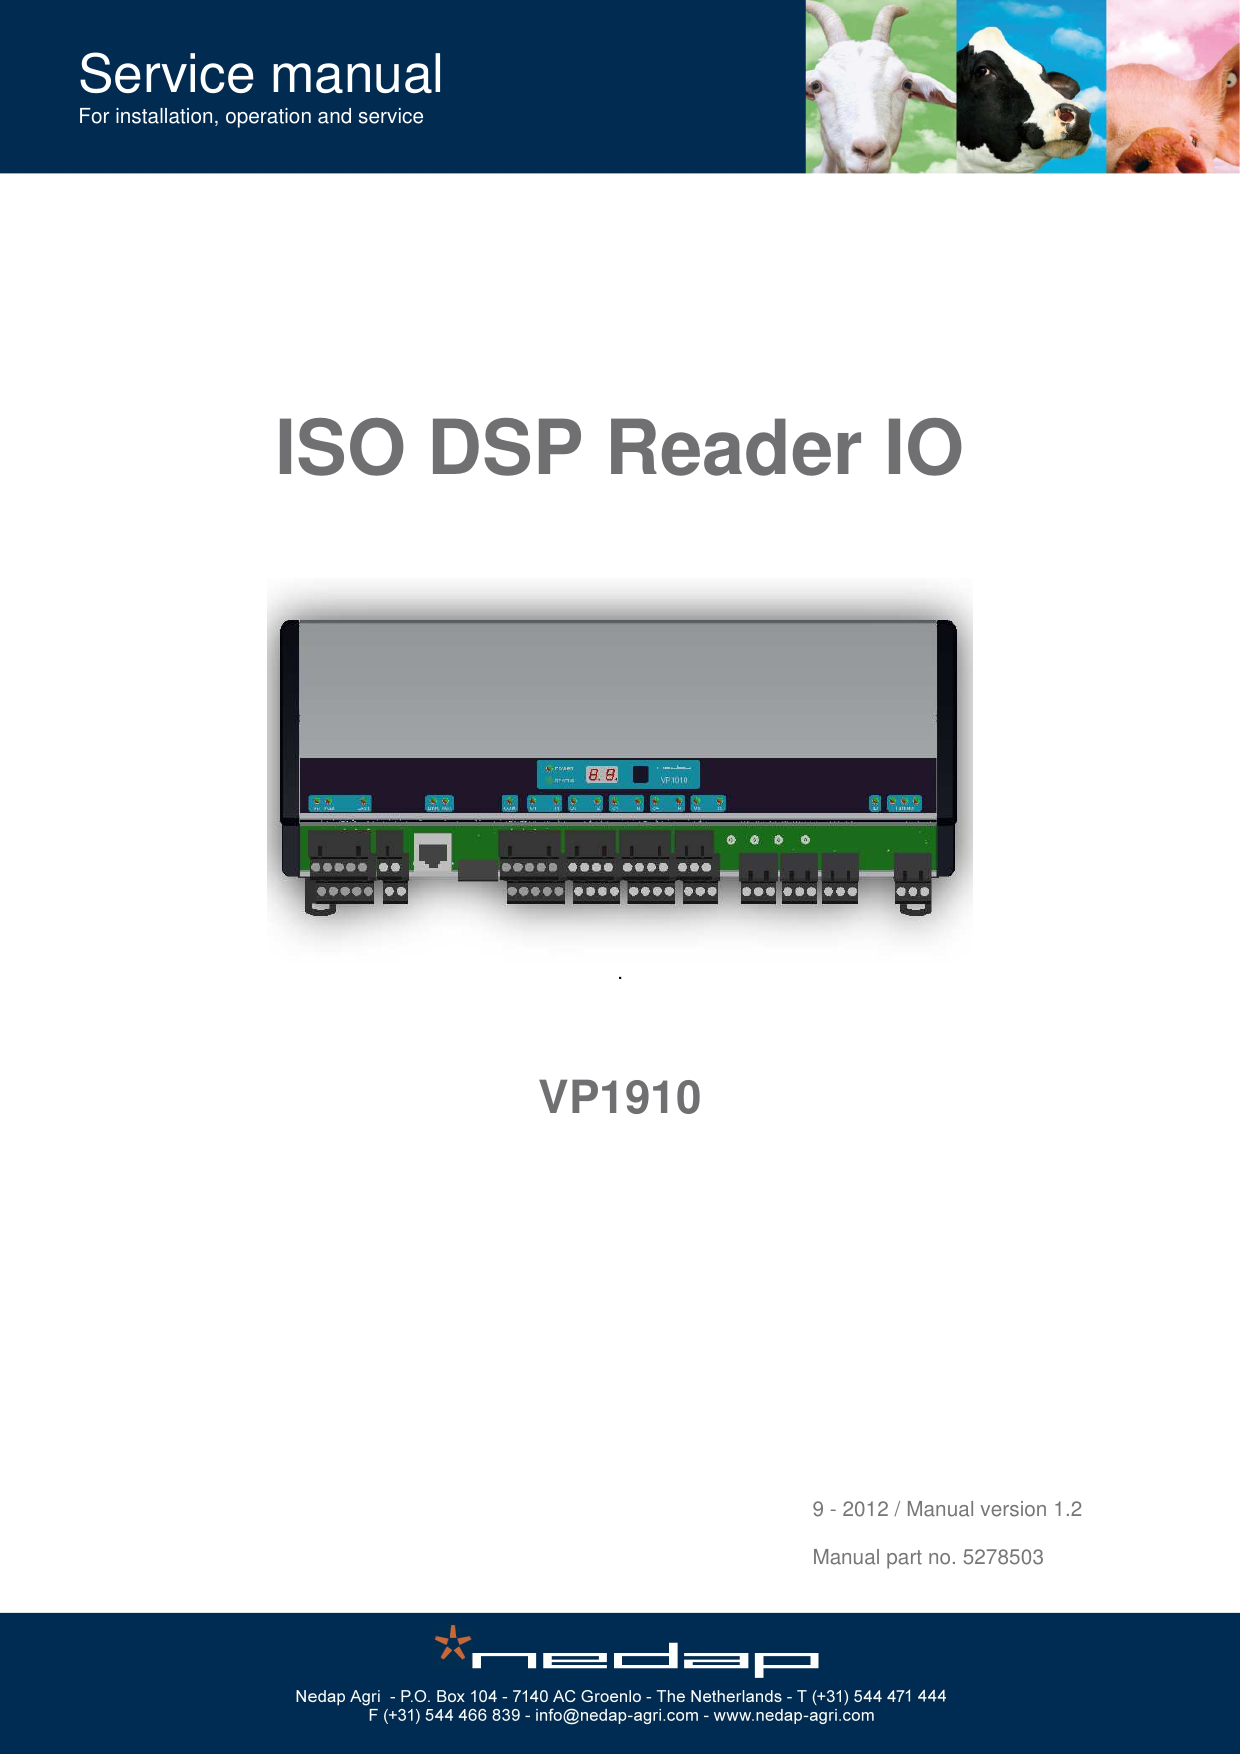  Service manual For installation, operation and service         ISO DSP Reader IO   .    VP1910                                    9 - 2012 / Manual version 1.2               Manual part no. 5278503